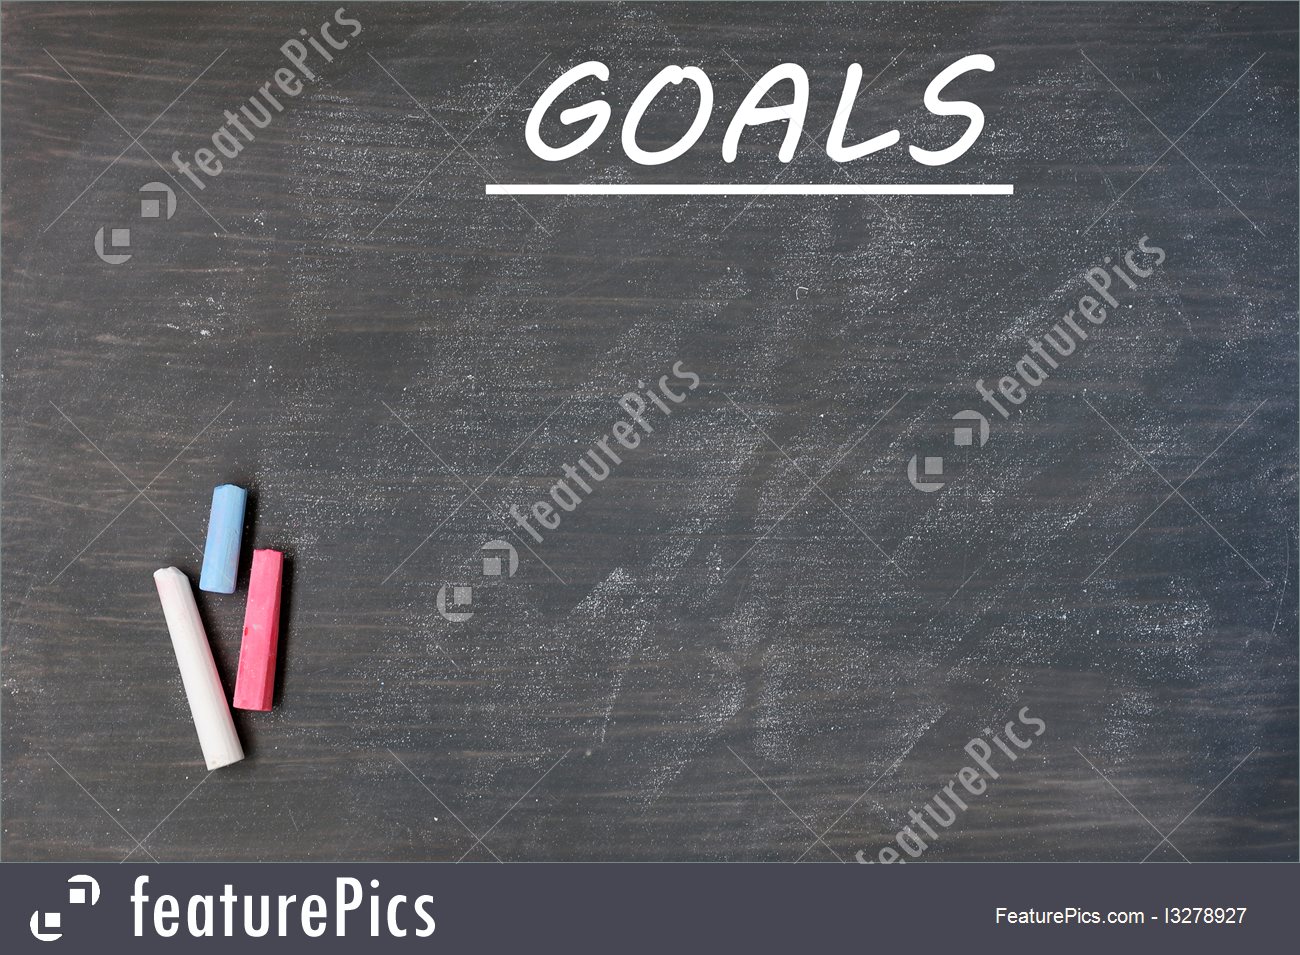 Signs And Info Blank Goals Background On A Smudged Blackboard